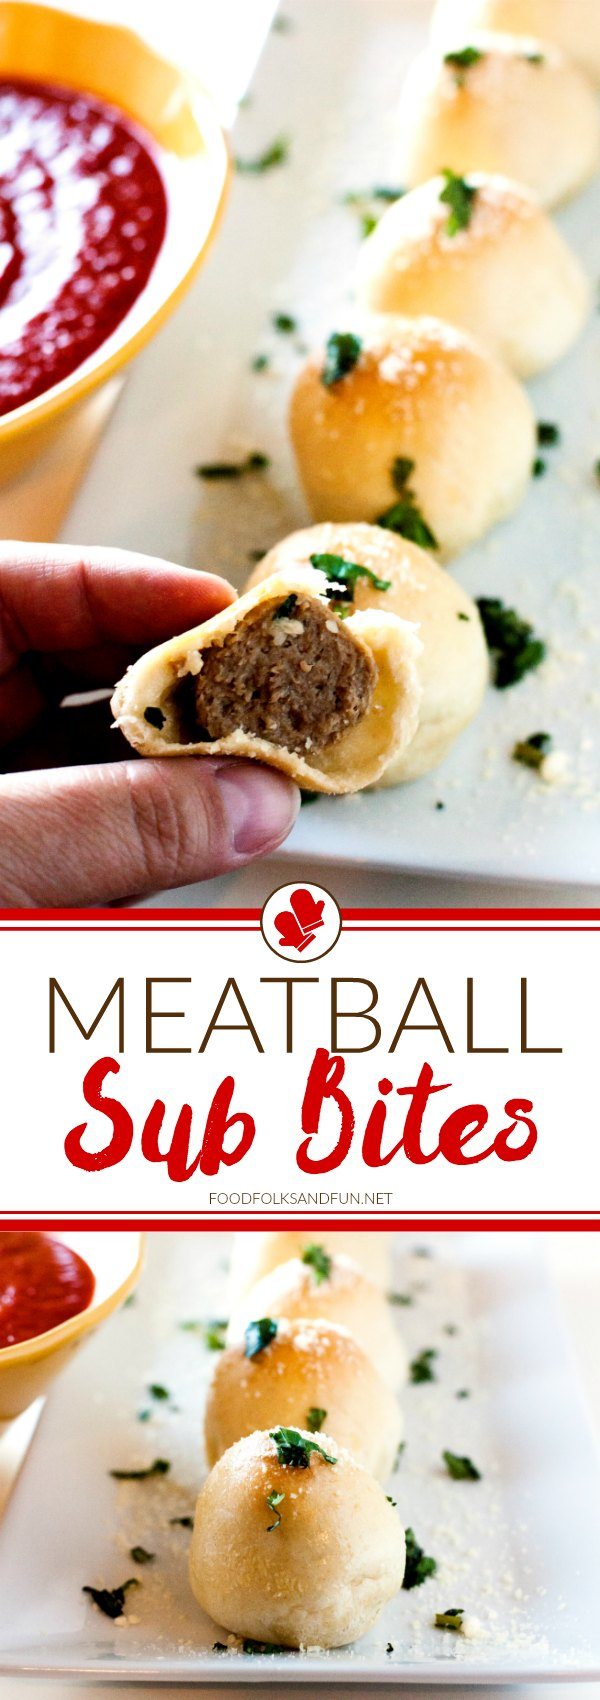 These Meatball Sub Bites are a fun twist on the classic sub. They're not nearly as messy, but every bit as good! They’re also great for game day, holidays, and potlucks, too! via @foodfolksandfun